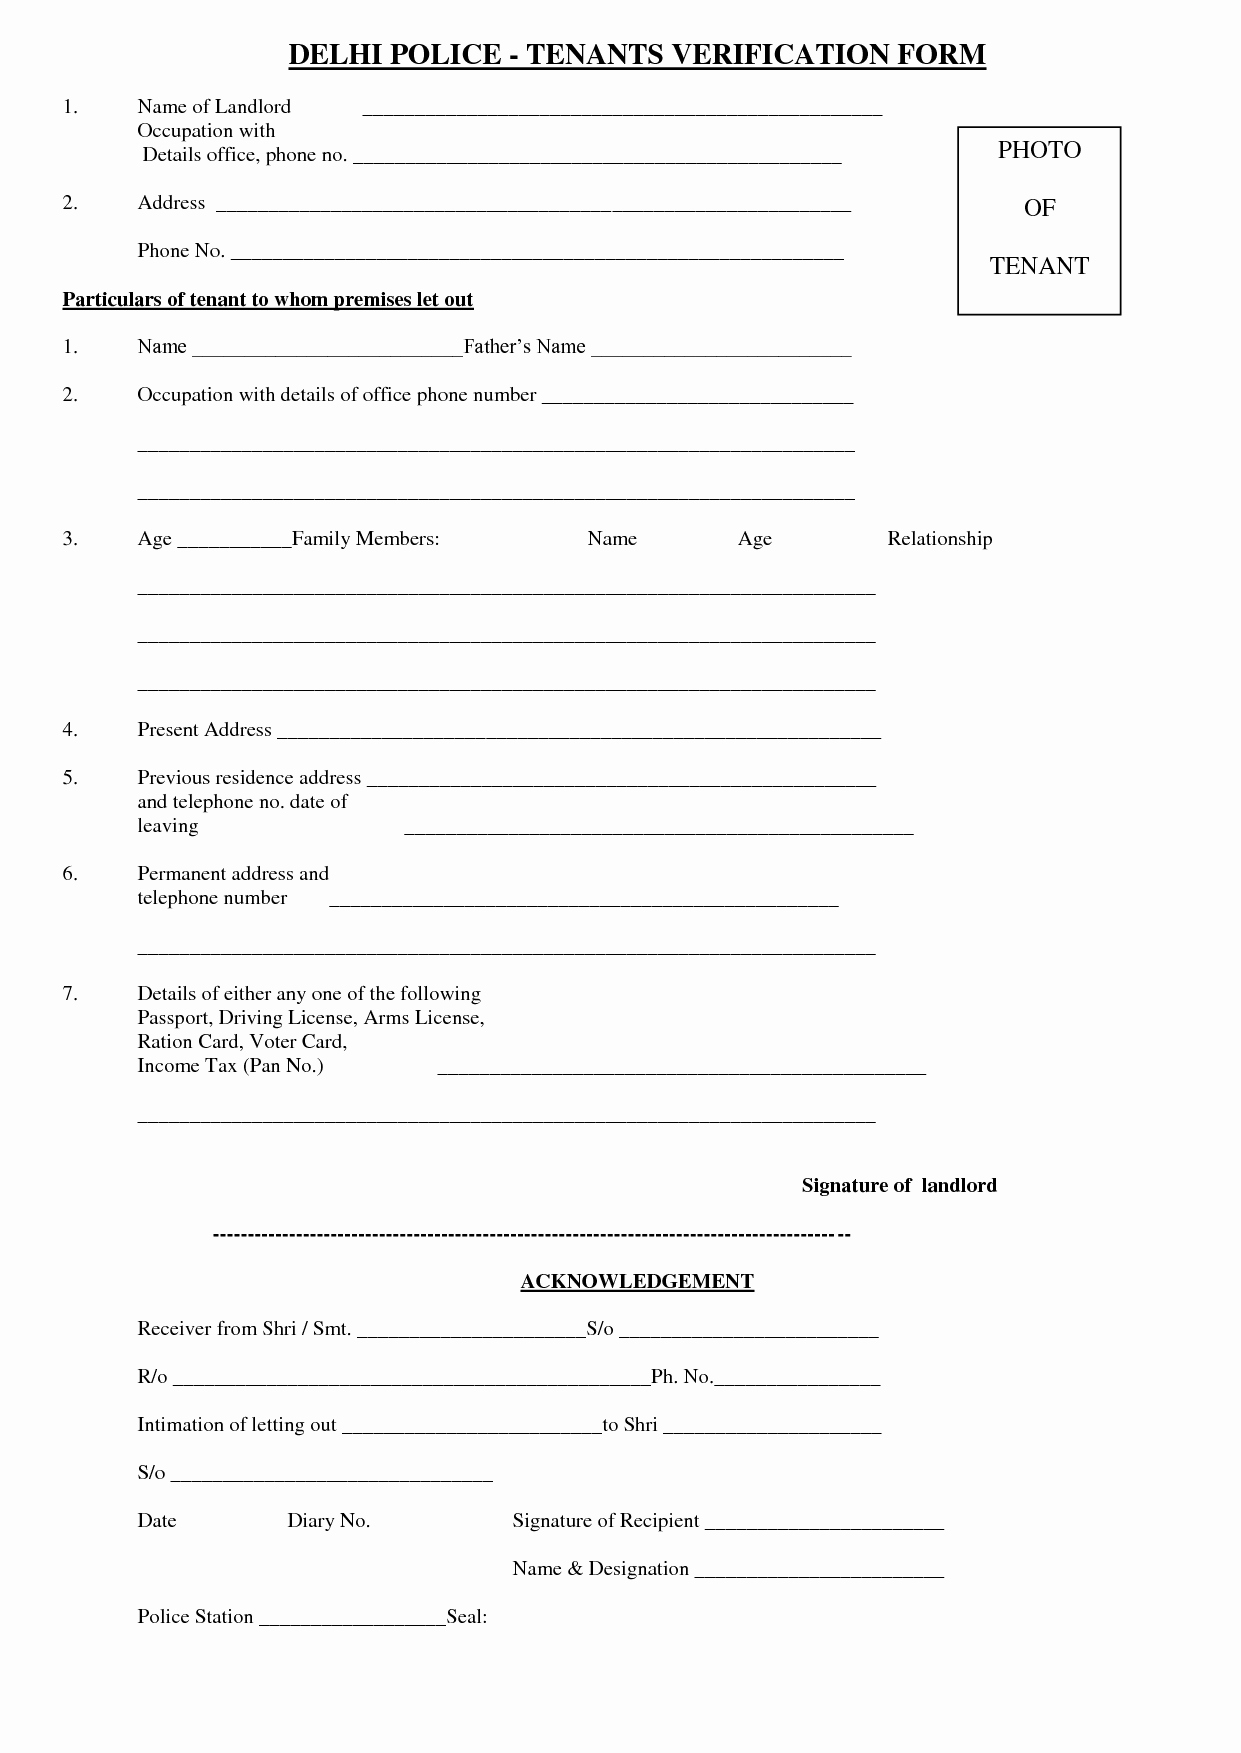 Landlord Verification form Template Awesome Best S Of Landlord Verification form Free Rental